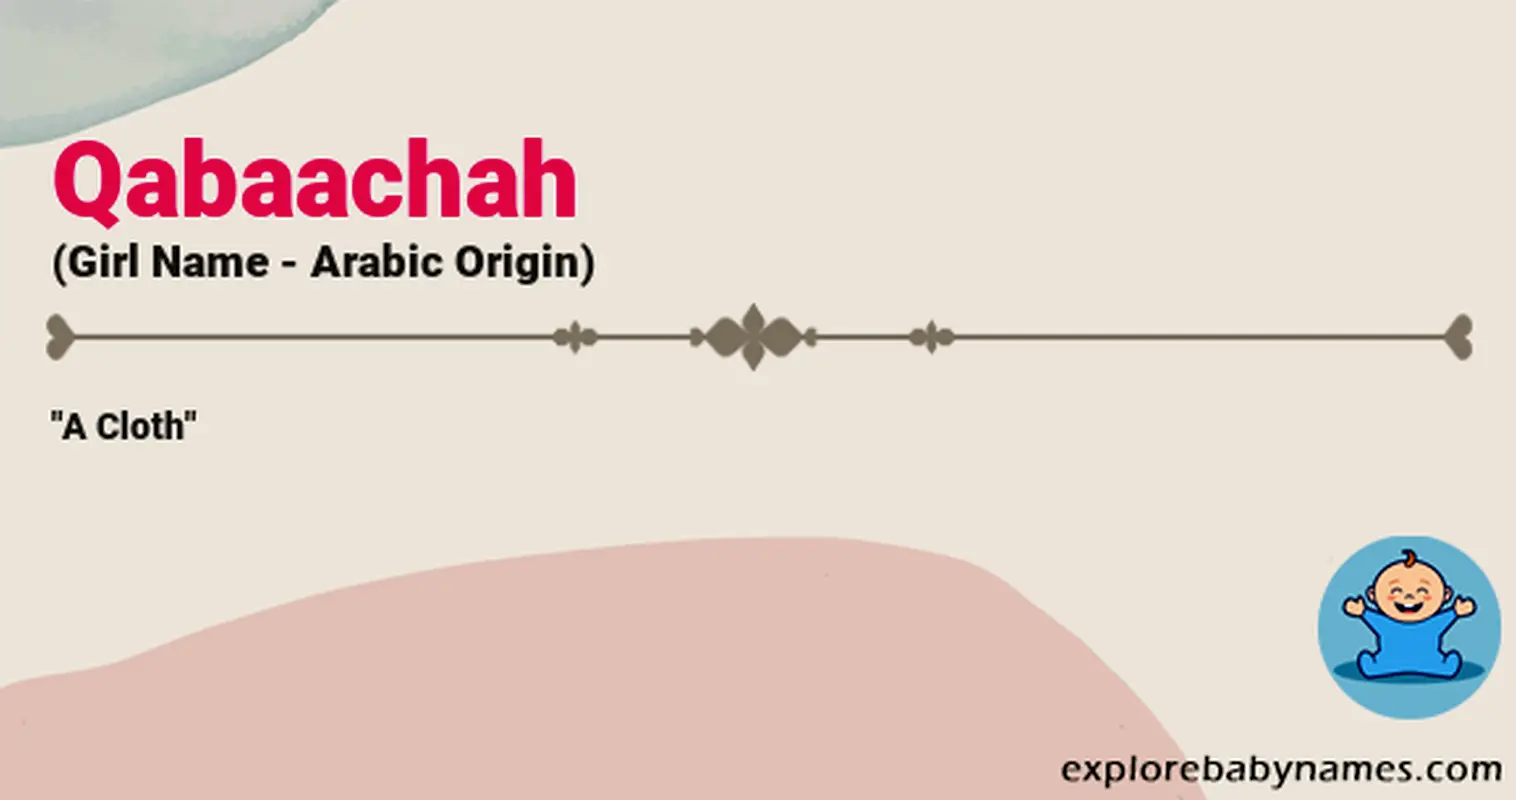 Meaning of Qabaachah